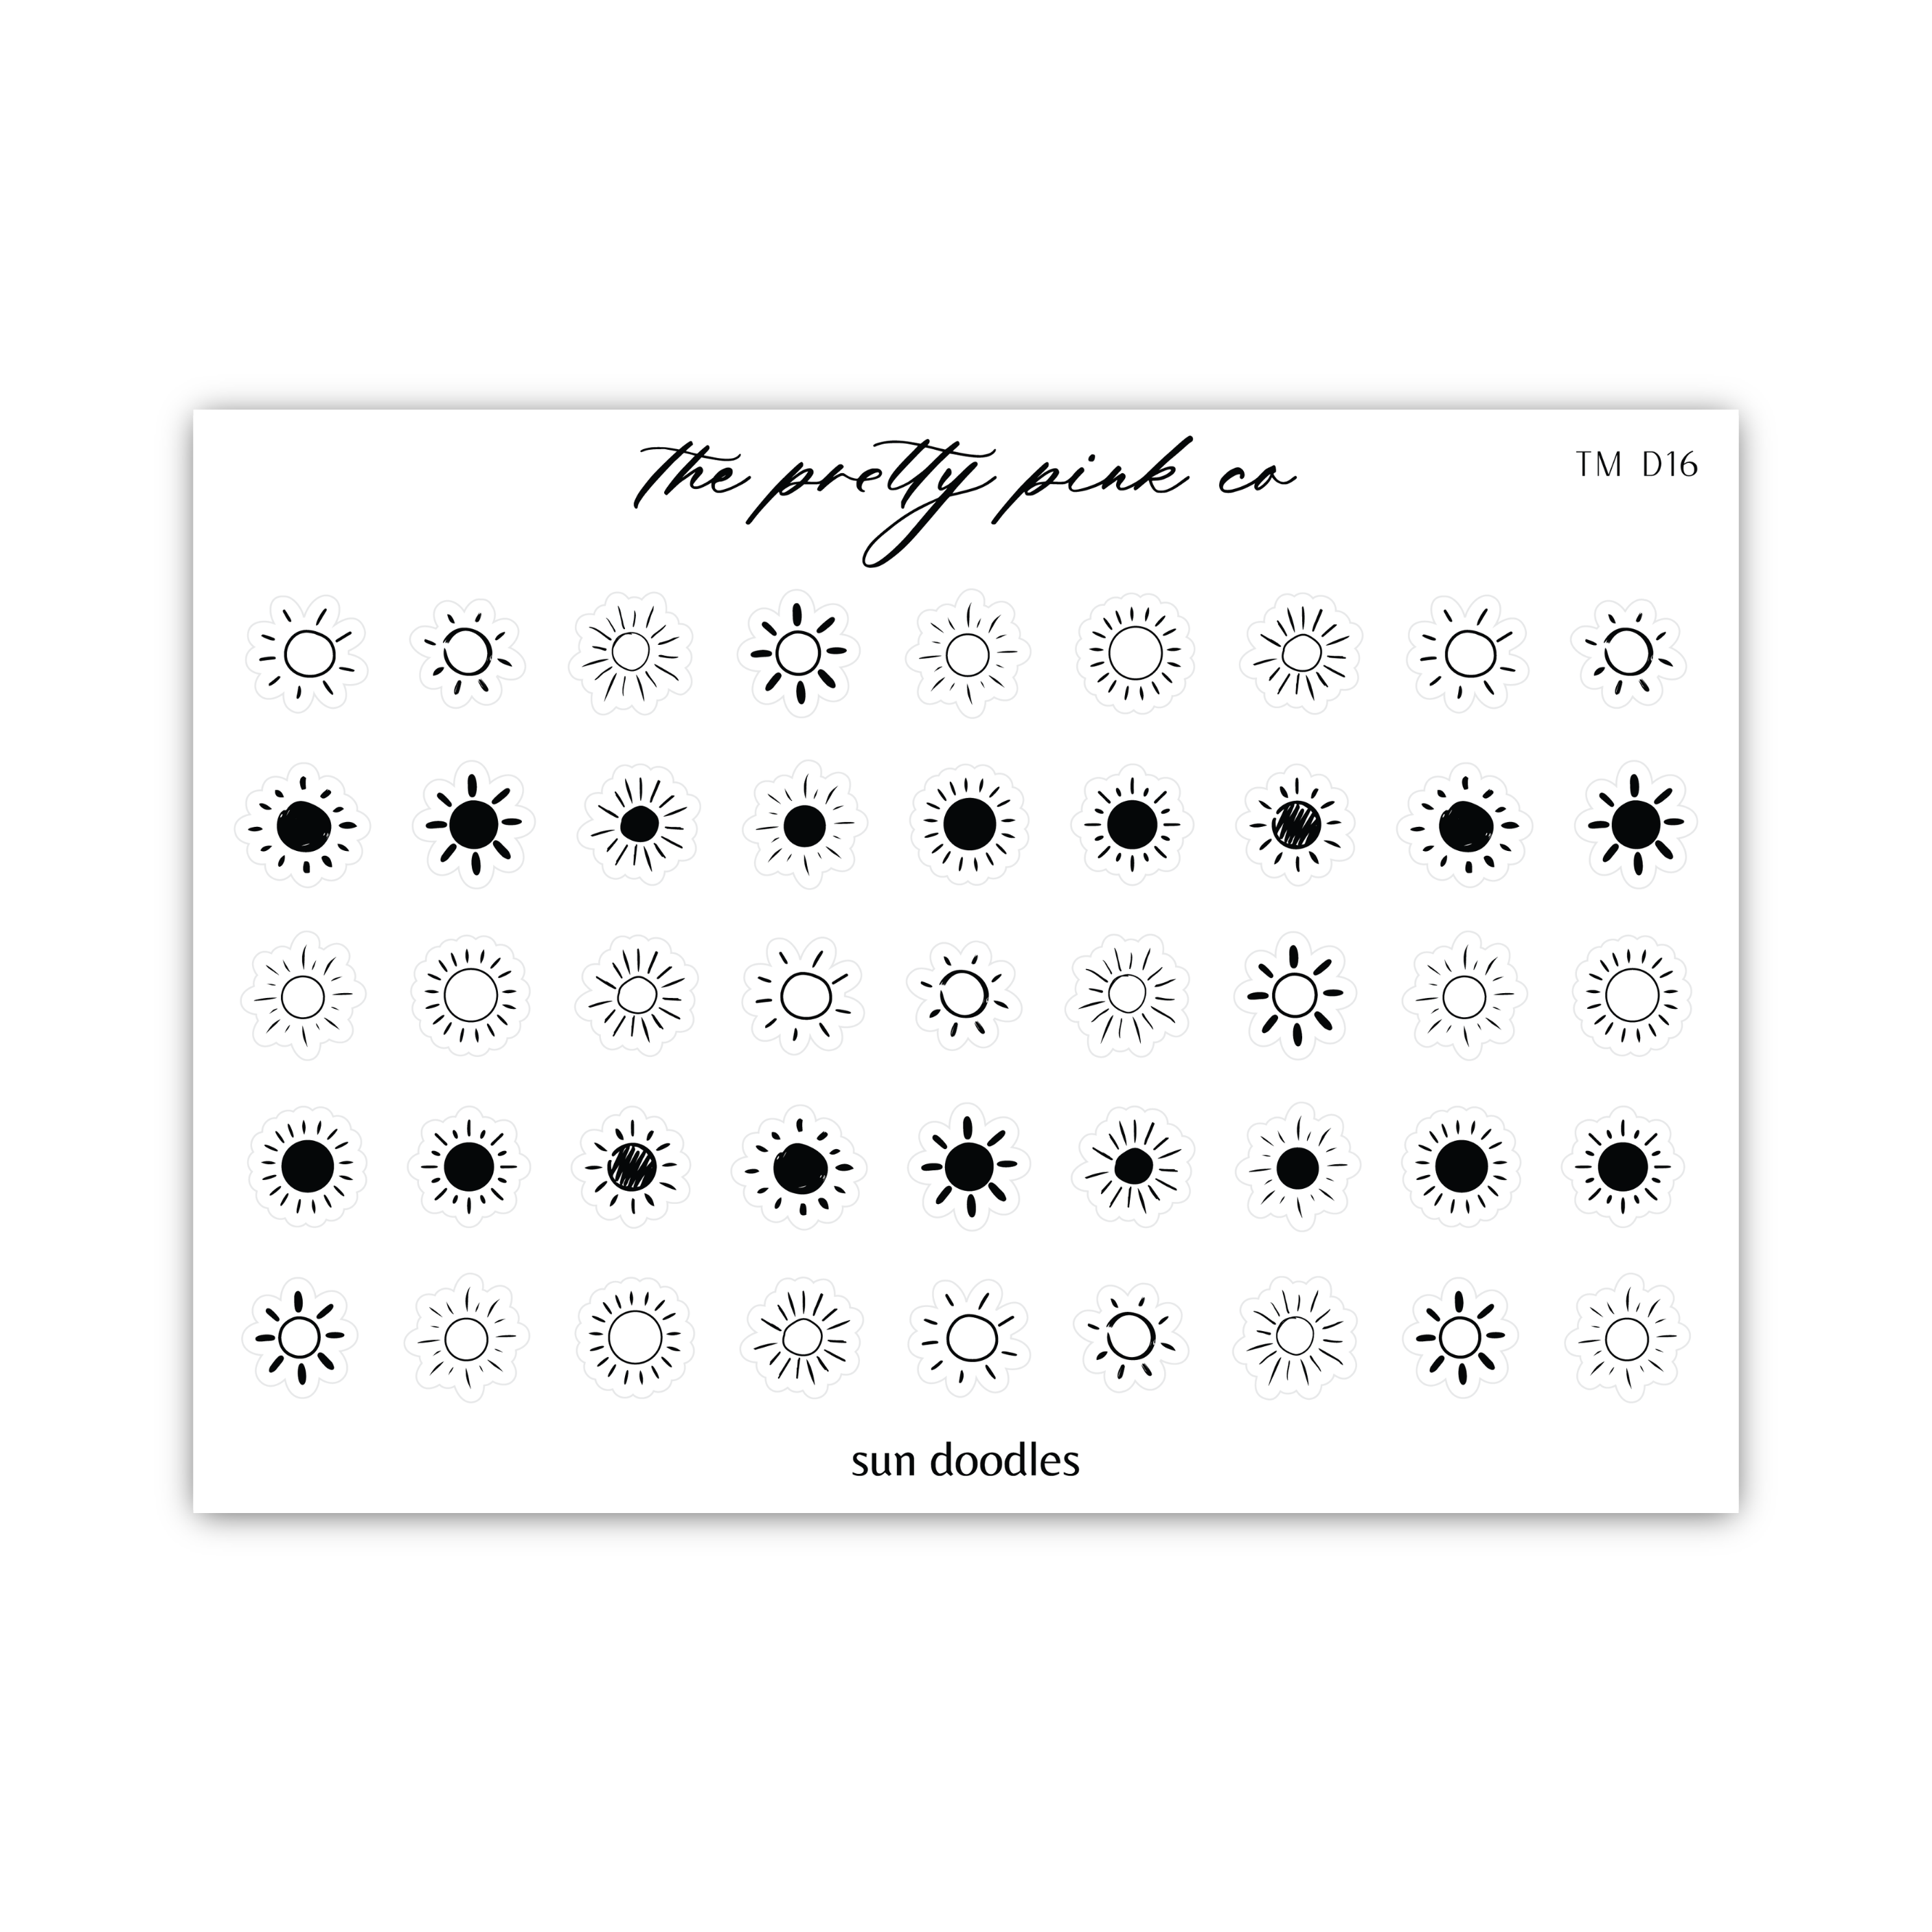 a sheet of sun doodles on a white background